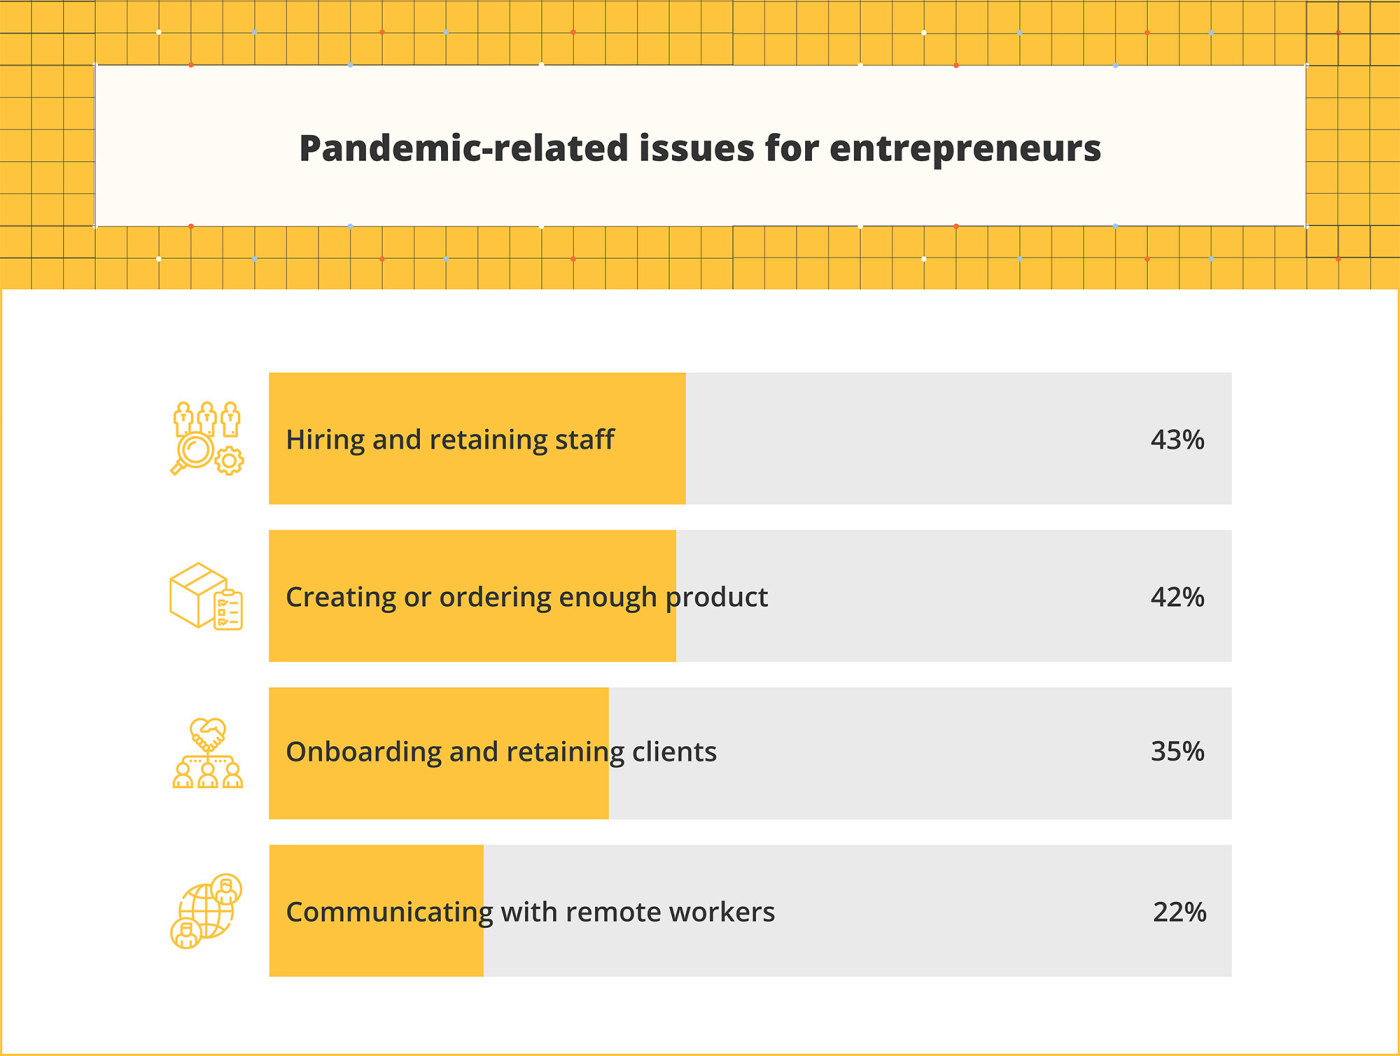 A bar graph showing pandemic-related issues for entrepreneurs, including hiring and retaining staff, creating or ordering enough product, onboarding and retaining clients, and communicating with remote workers